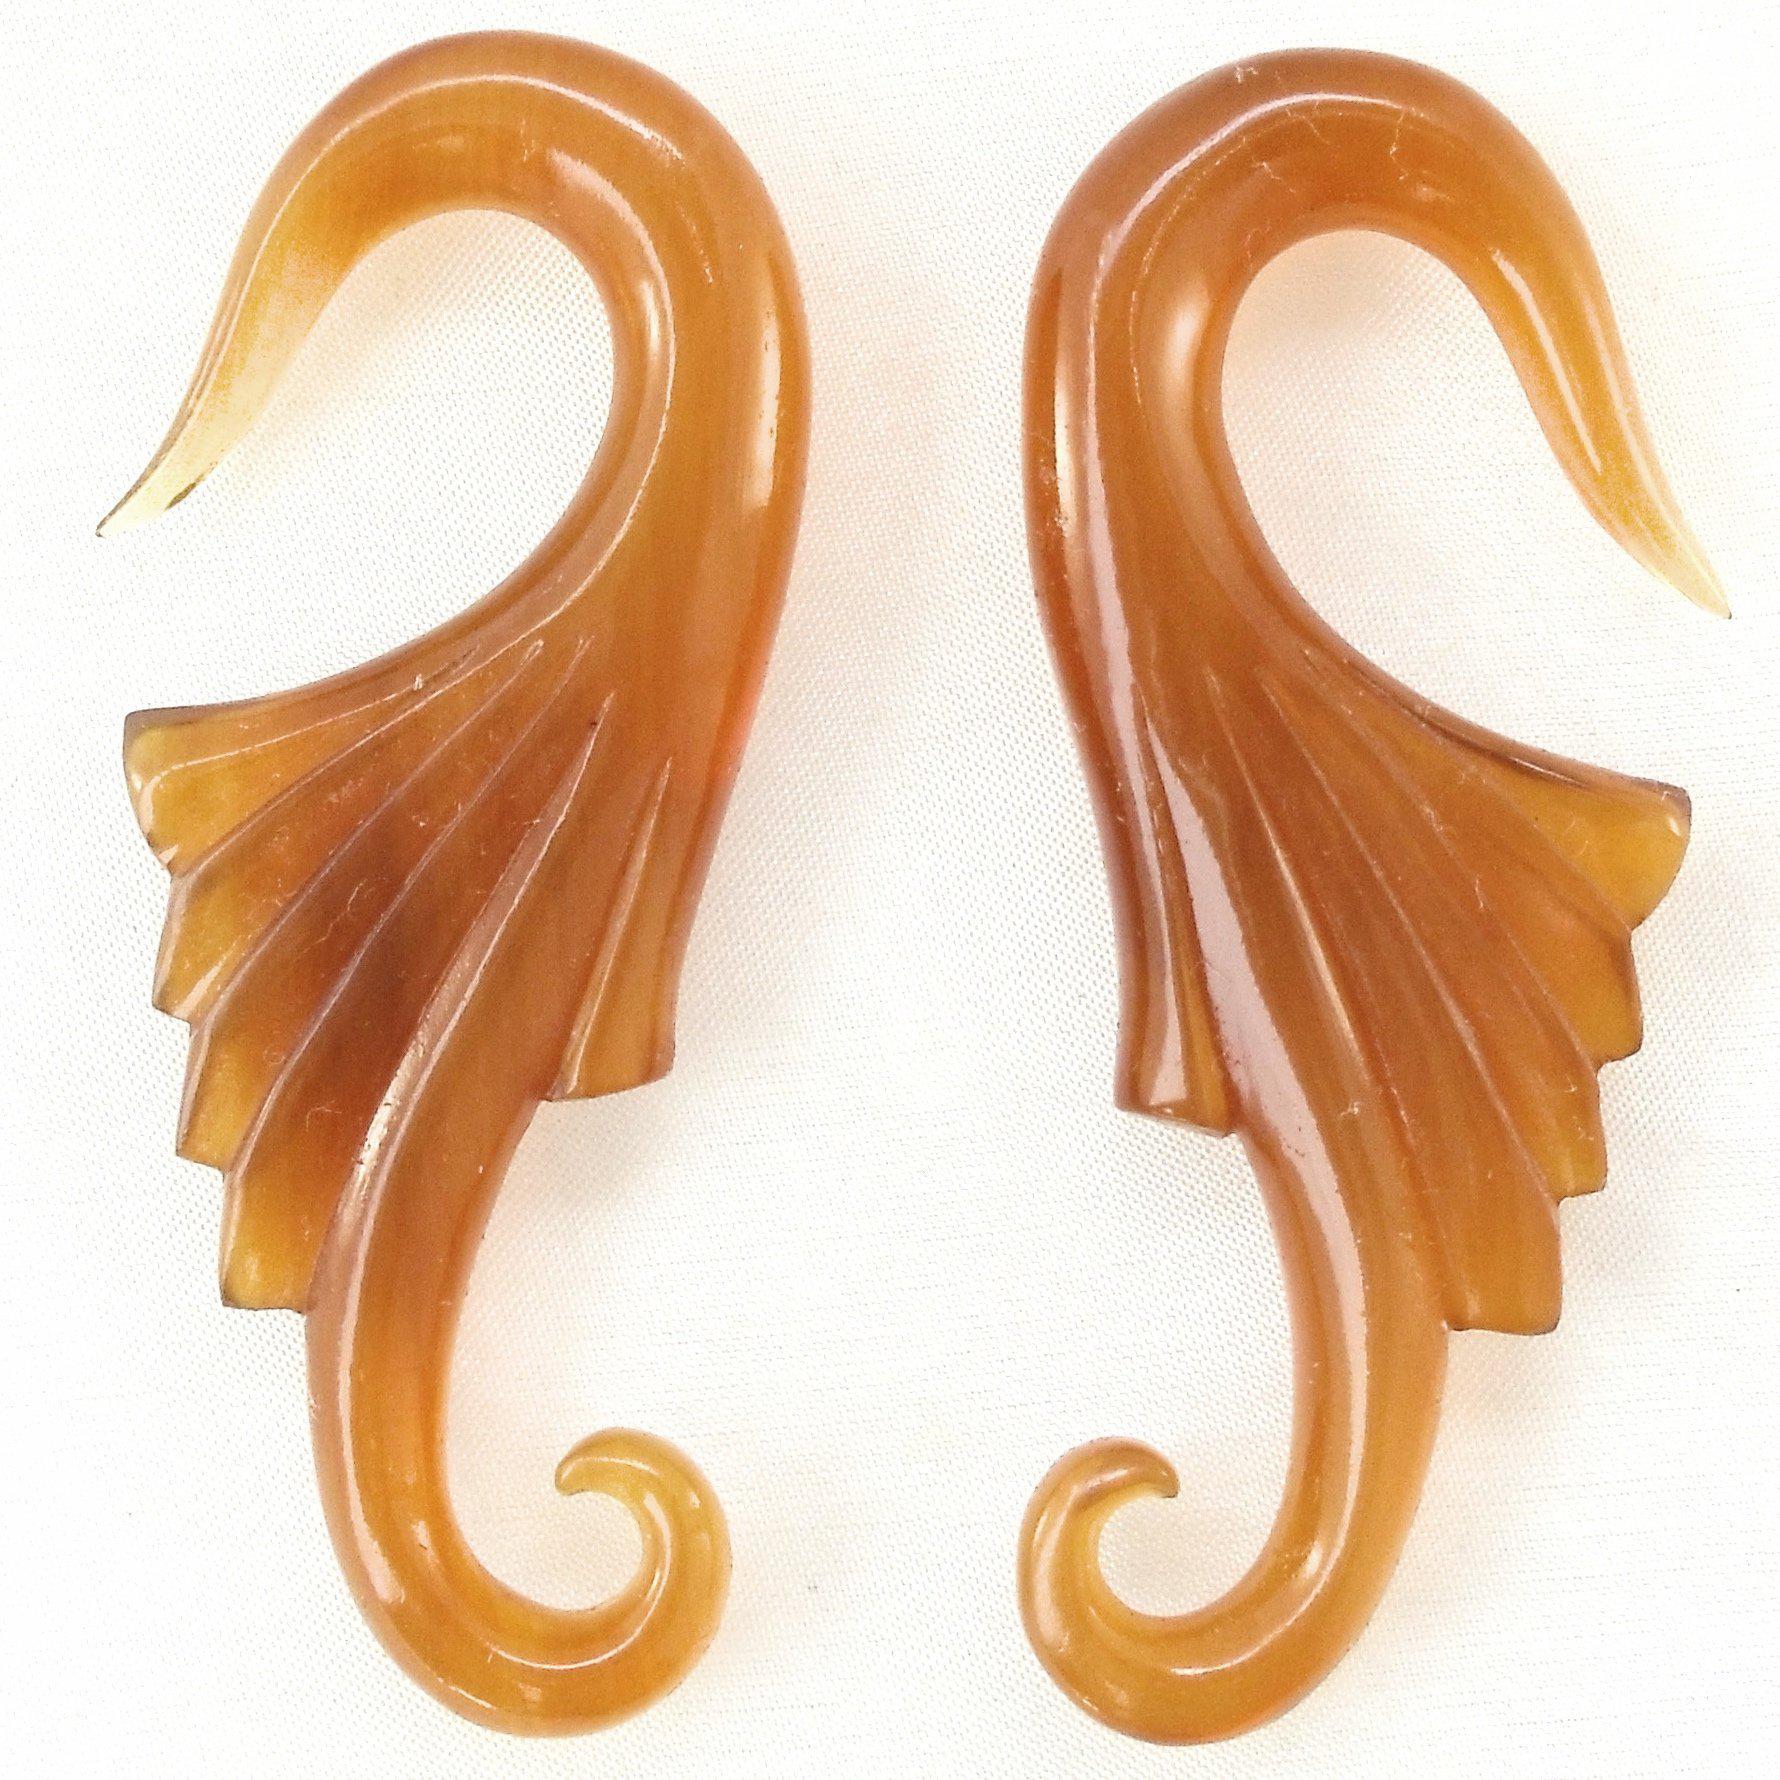 Body Jewelry :|: Nouveau Wings. Amber Horn 2g, Organic Body Jewelry. | Tribal Body Jewelry